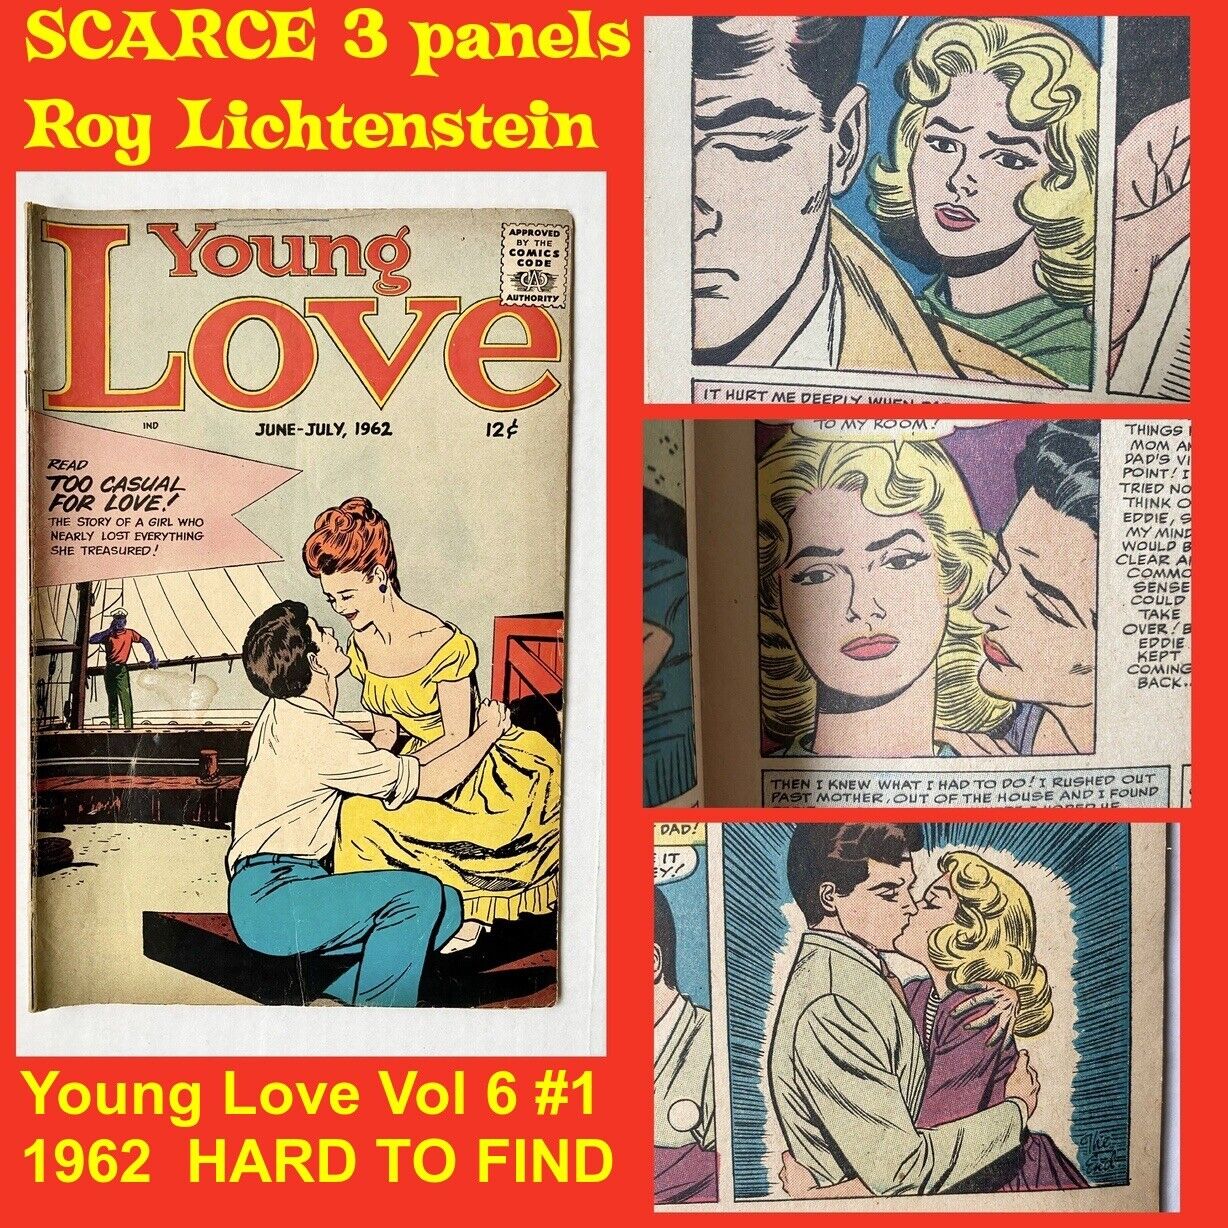 Young Love Vol 6 #1 1962 SCARCE 3 panels Roy Lichtenstein HTF In Any Grade RARE